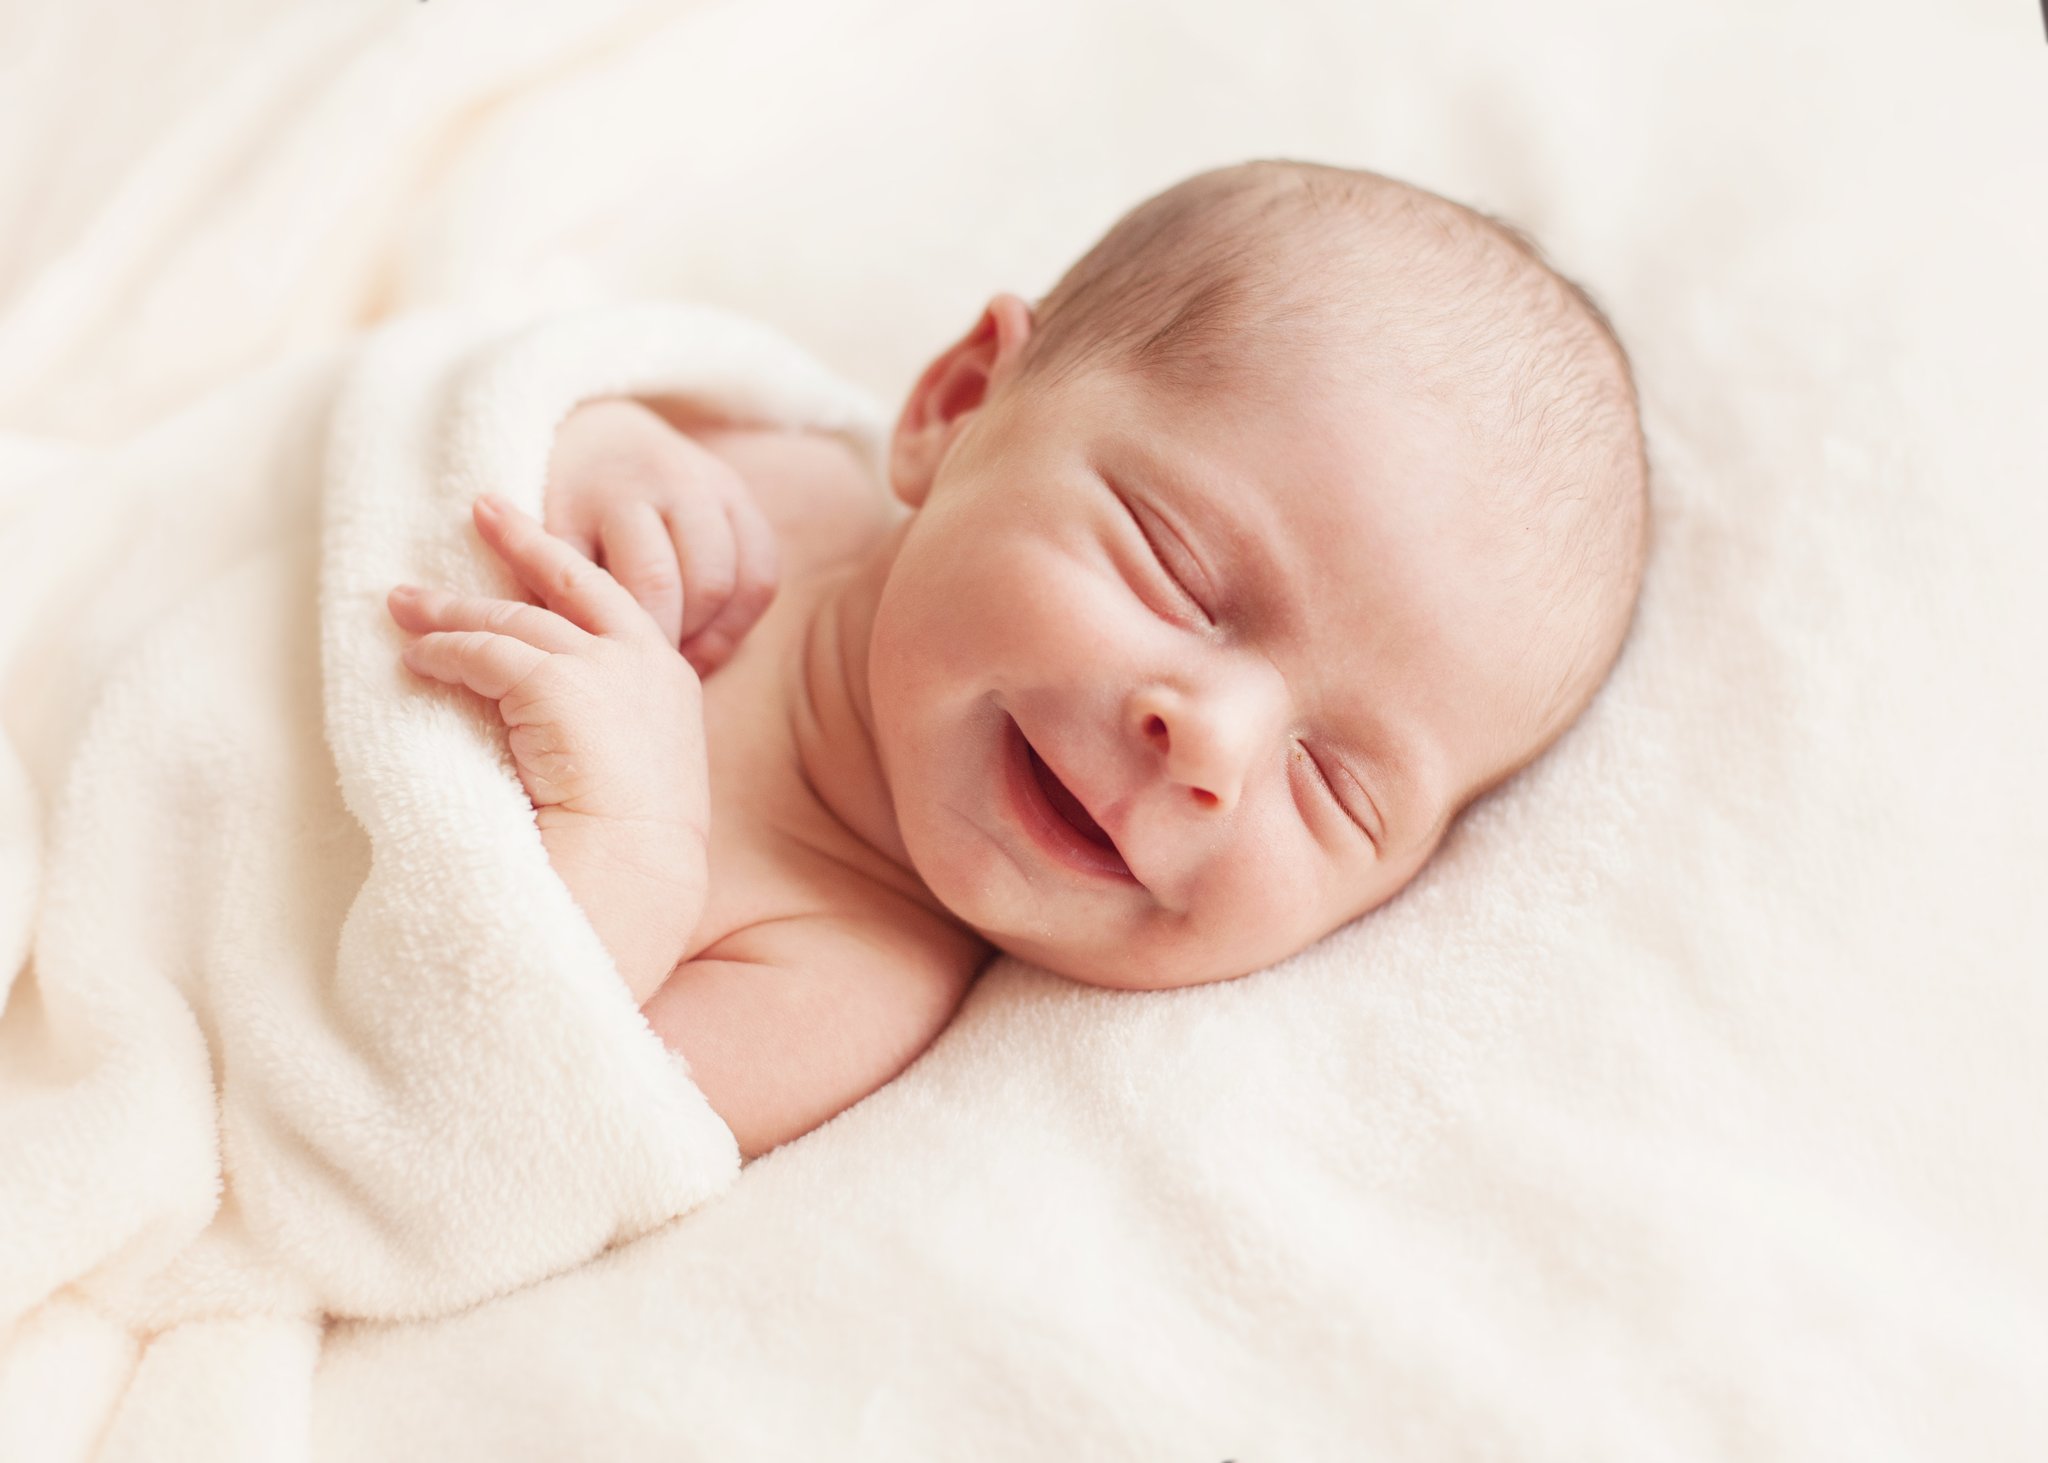 Infant colic and sleeping face down